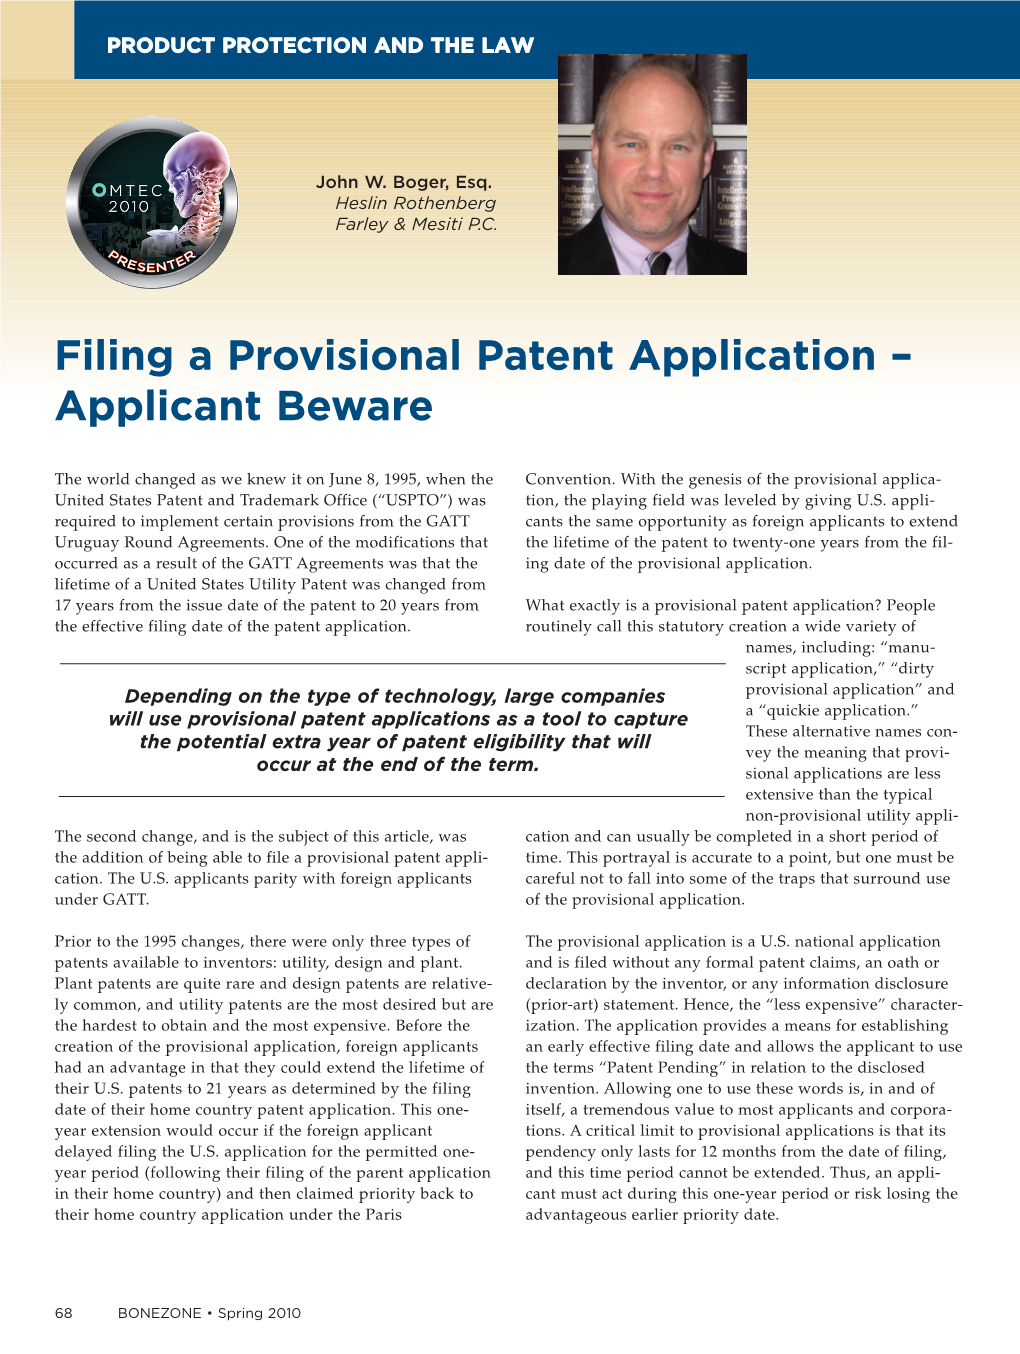 Filing a Provisional Patent Application – Applicant Beware